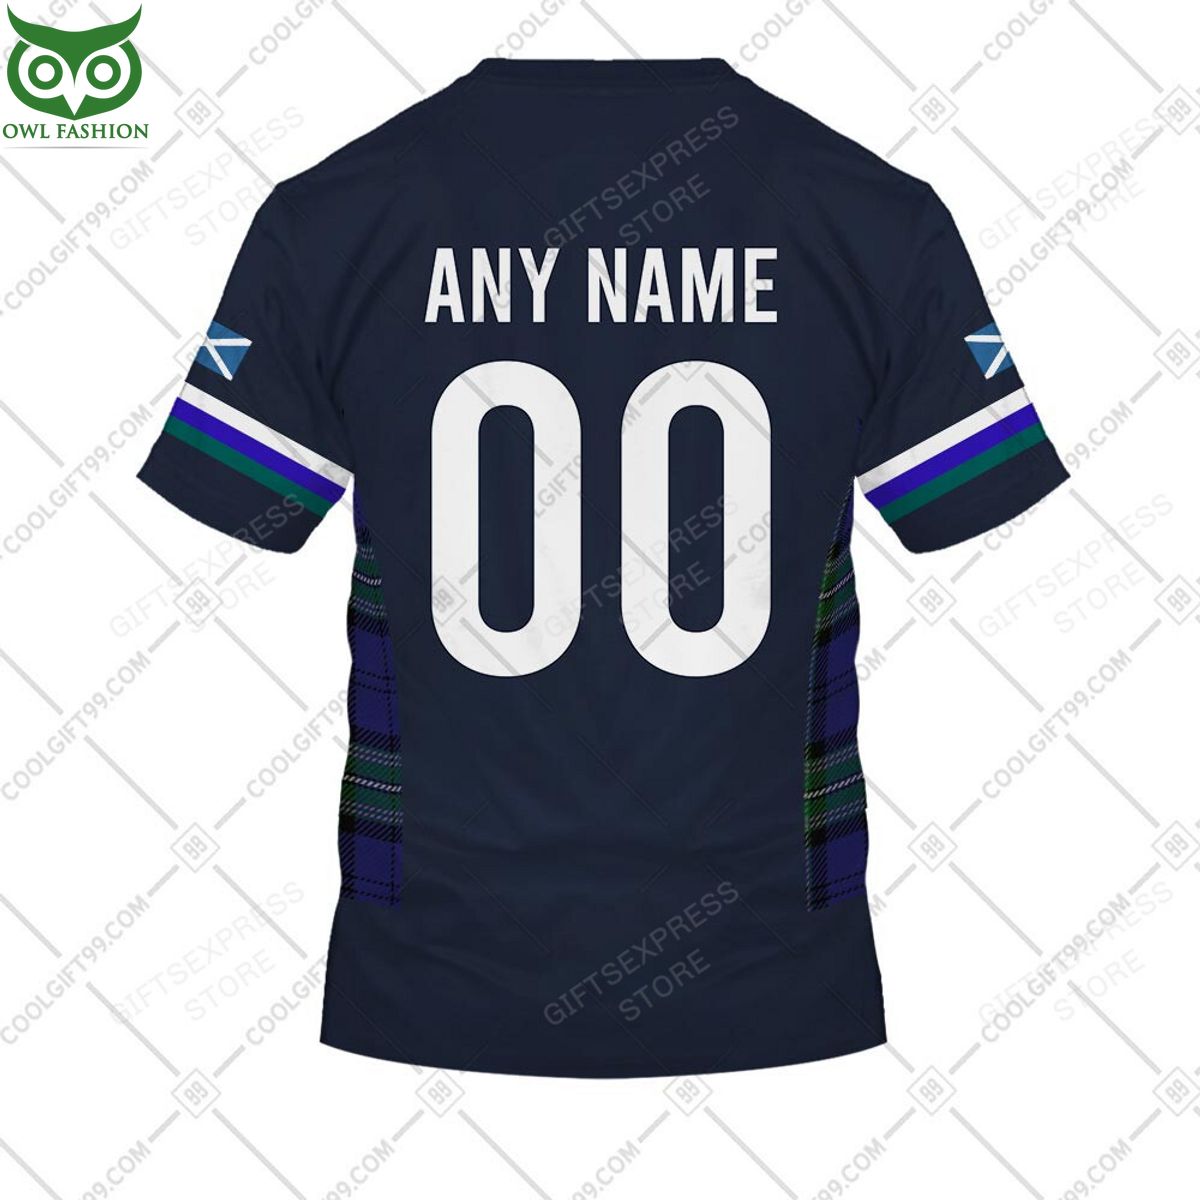 rugby world cup scotland home jersey personalized 3d hoodie tshirt 3 z4AhA.jpg